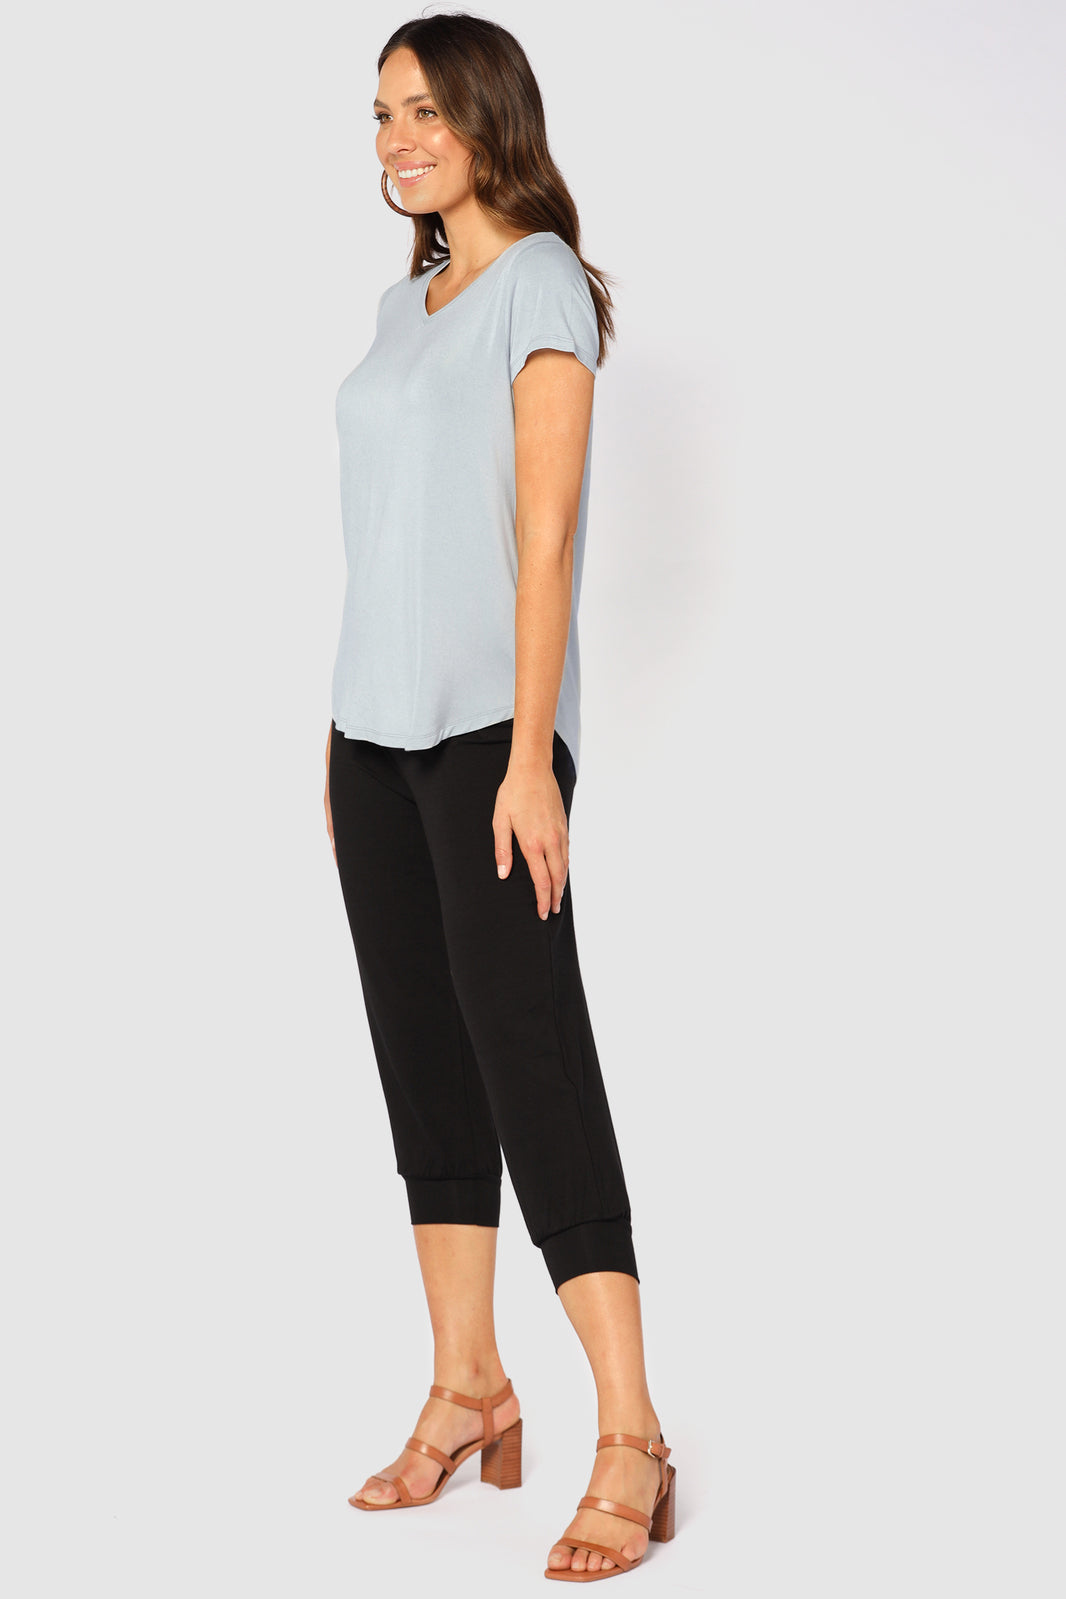 Slouch Pants - Black | Bamboo Body